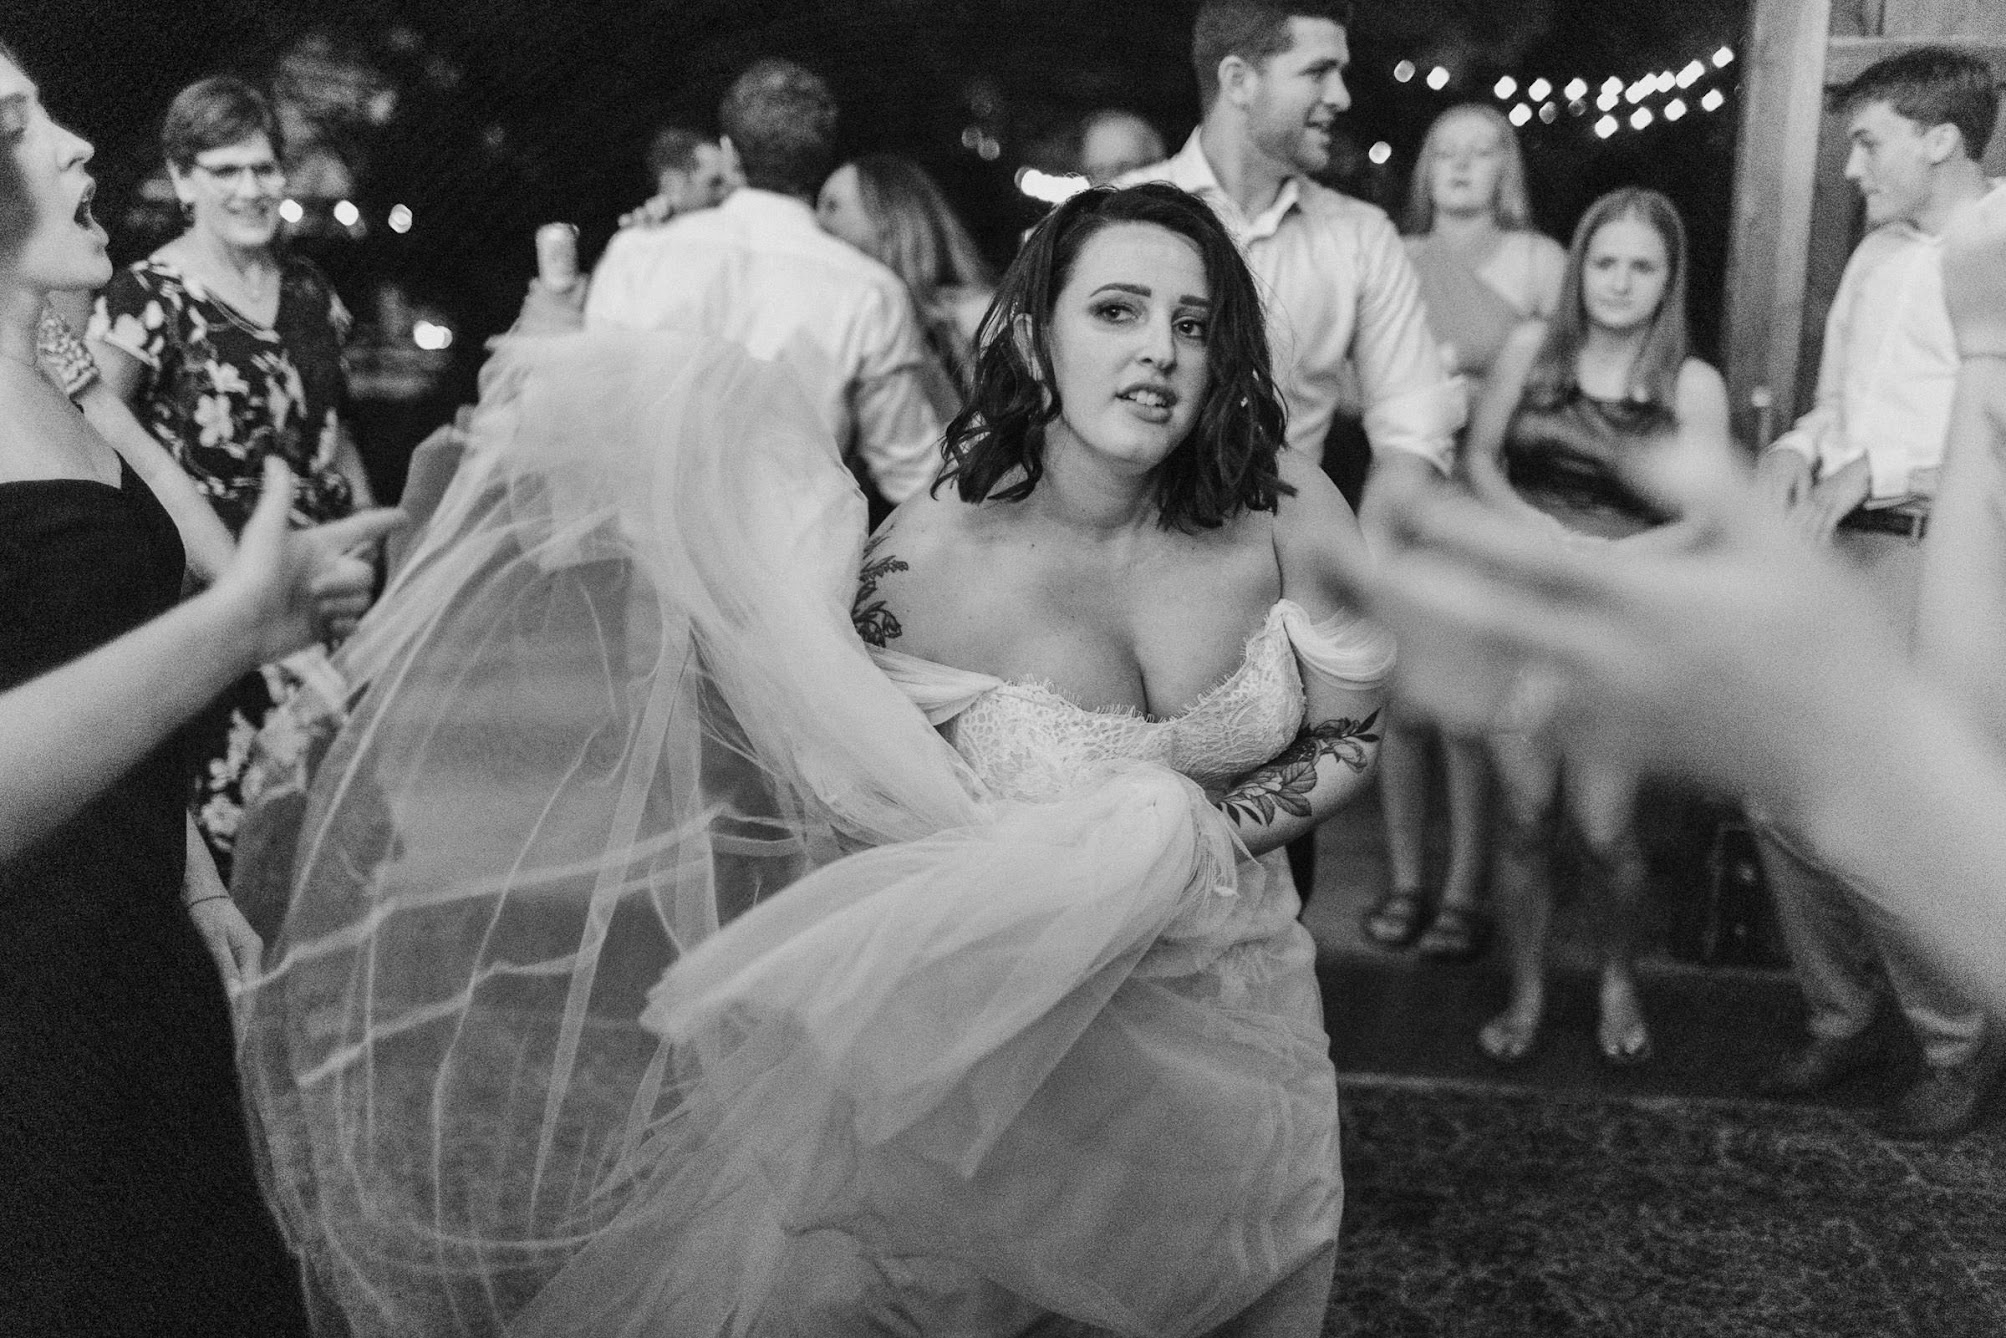 The bride waves her dress around while the night comes to an end.